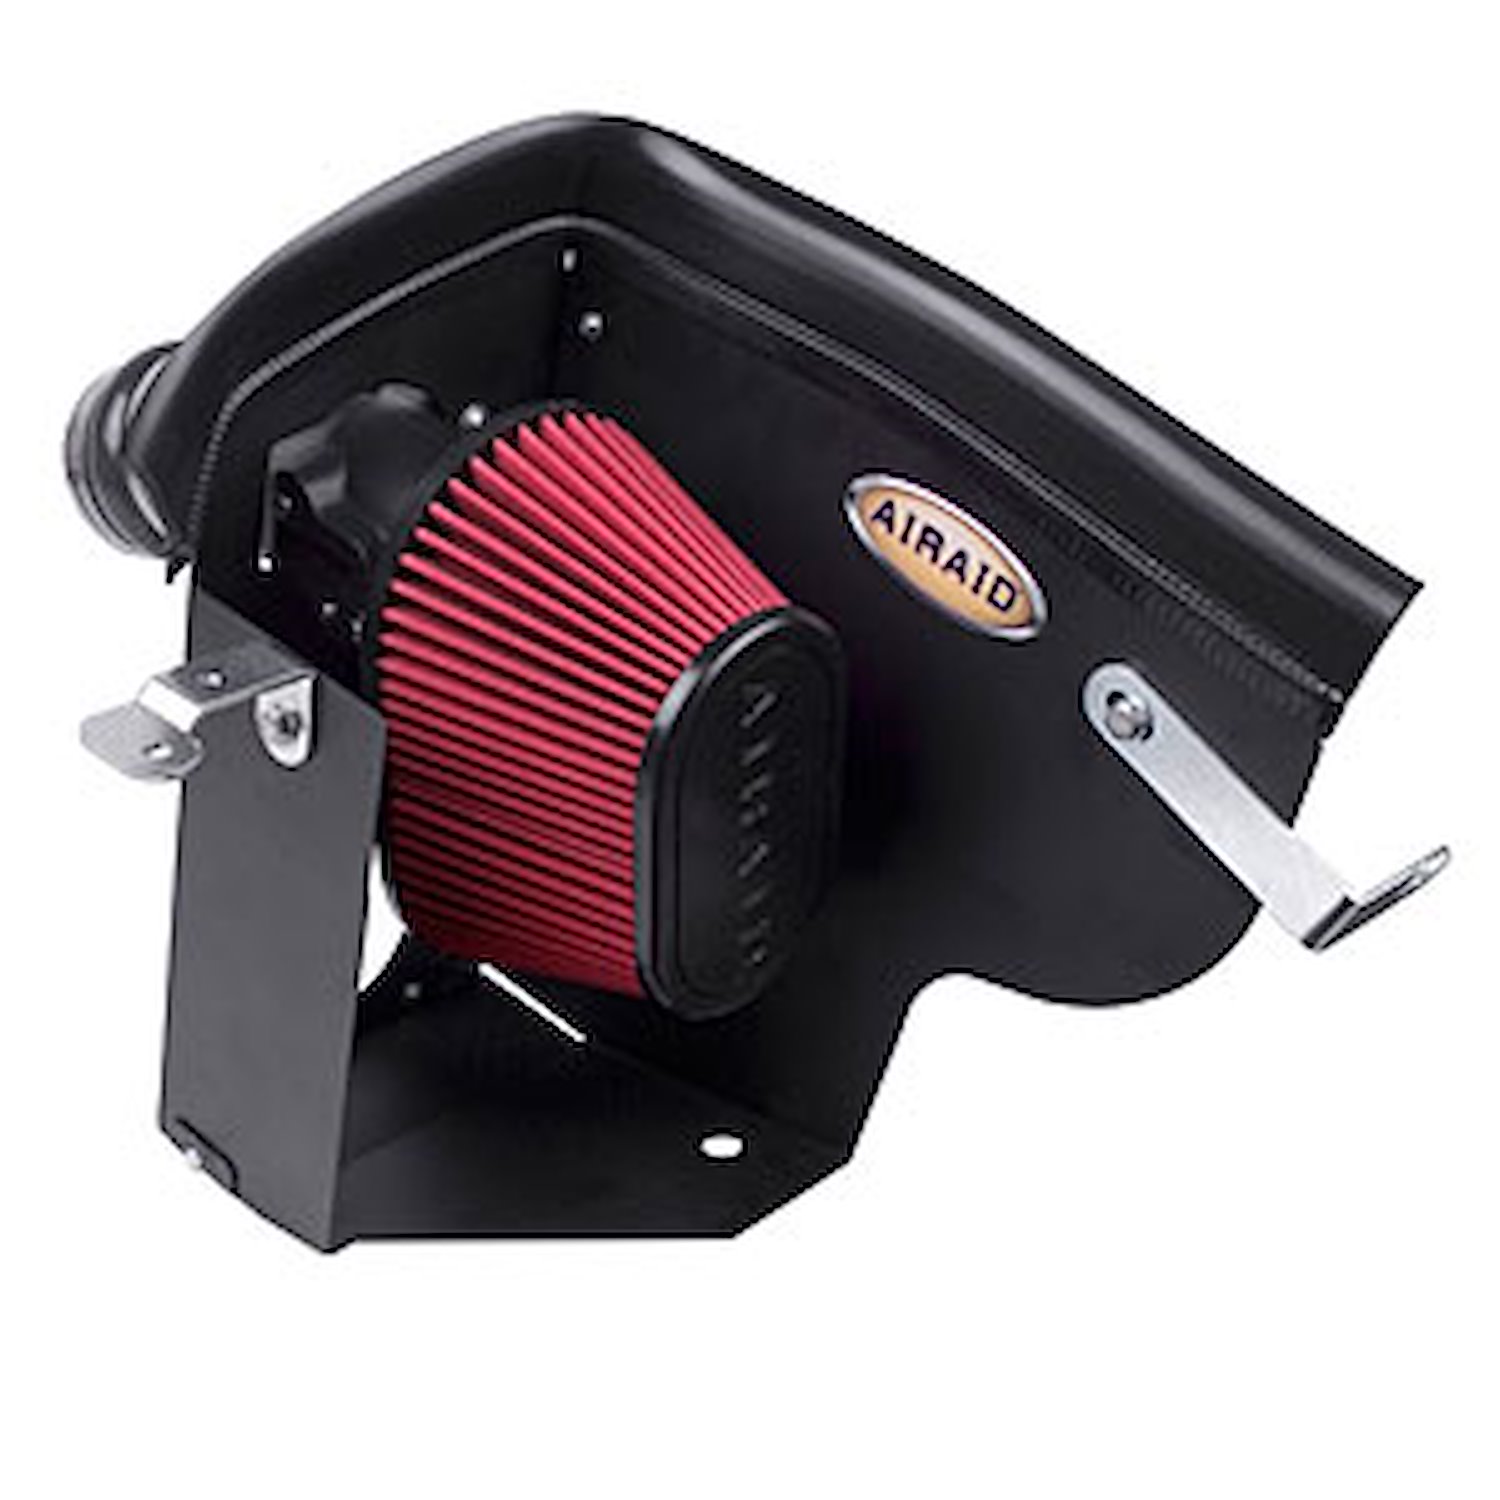 Cold Air Intake System 2008-2010 Ford Focus 2.0L Non PZEV (Partial Zero Emissions Vehicle)